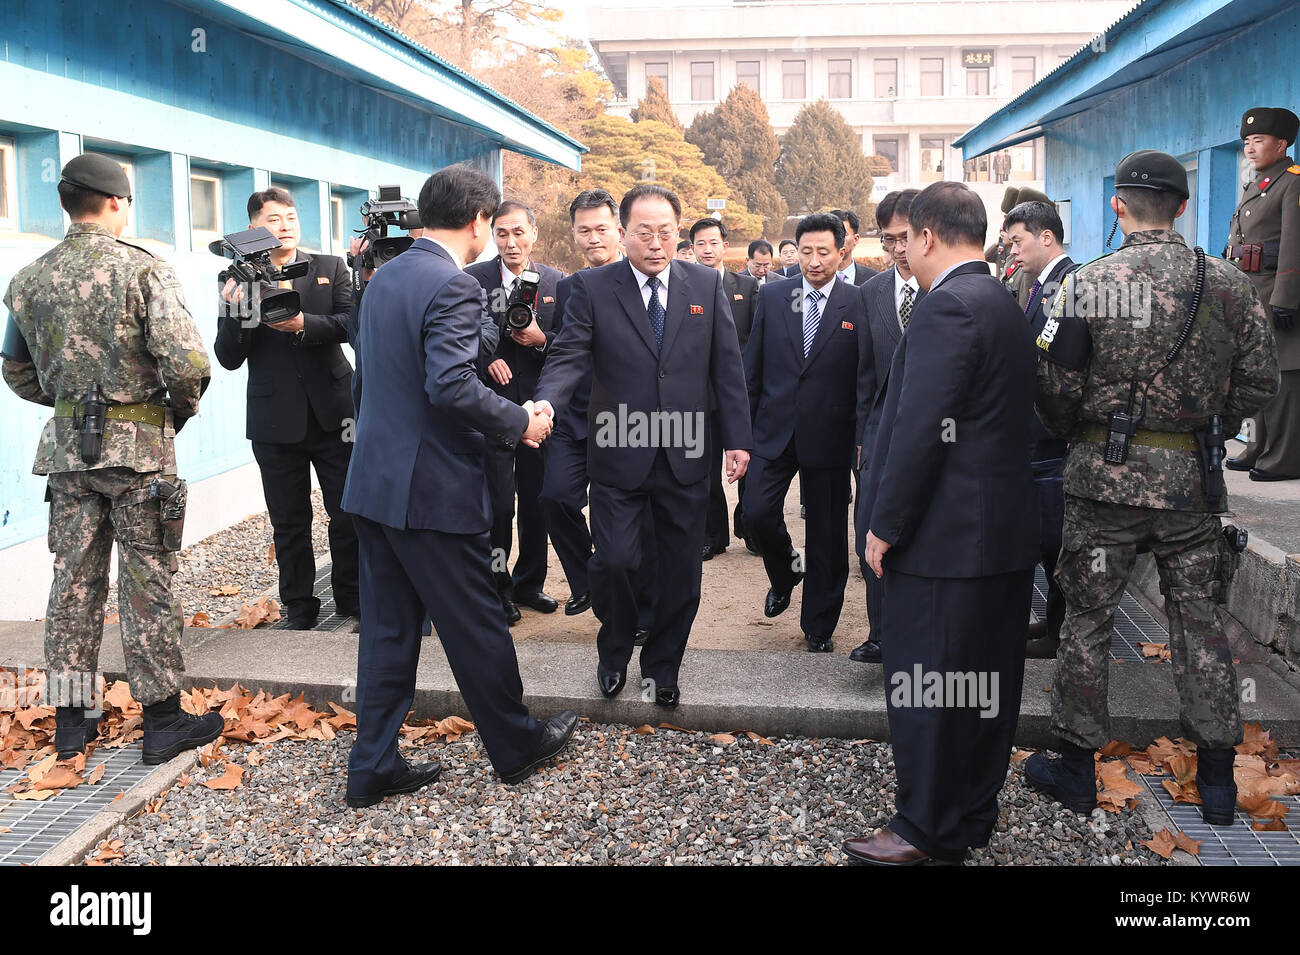 Seoul, Panmunjom, South Korea. 17th Jan, 2018. Jon Jong Su(C), vice chairman of the Committee for the Peaceful Reunification of the Fatherland of the Democratic People's Republic of Korea (DPRK), arrives for talks at the truce village of Panmunjom, Jan. 17, 2018. Working-level talks between South Korea and DPRK were underway Wednesday at the truce village of Panmunjom to discuss the DPRK's dispatch of athletes to the South Korea-hosted Winter Olympics, Seoul's Unification Ministry said. Credit: South Korean Unification Ministry/Xinhua/Alamy Live News Stock Photo